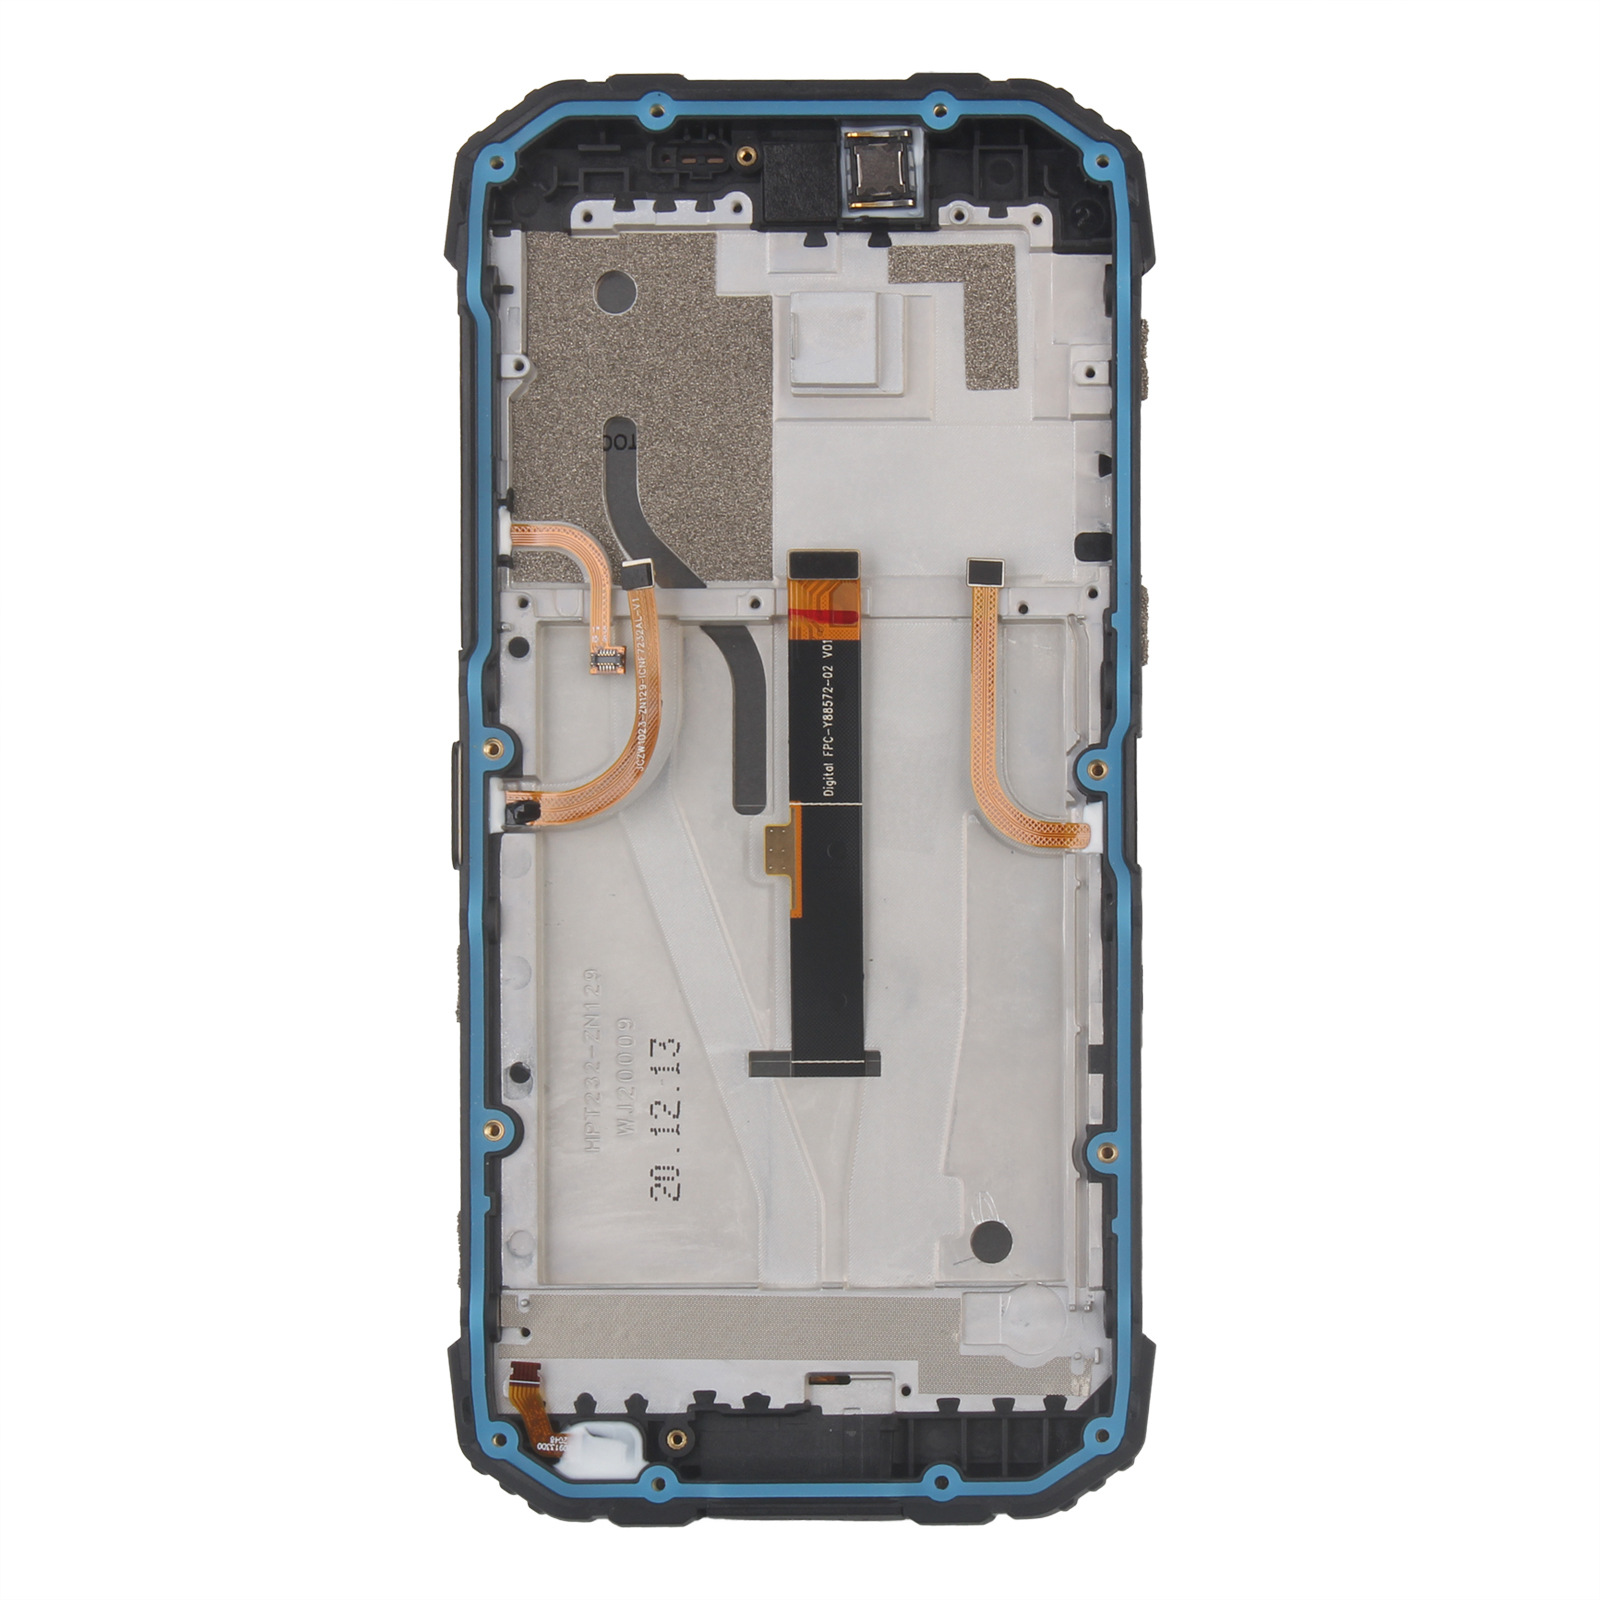 DOOGEE-Original-for-Doogee-S96-Pro-LCD-Display--Touch-Screen-Digitizer-Assembly-Replacement-Parts-wi-1868571-9